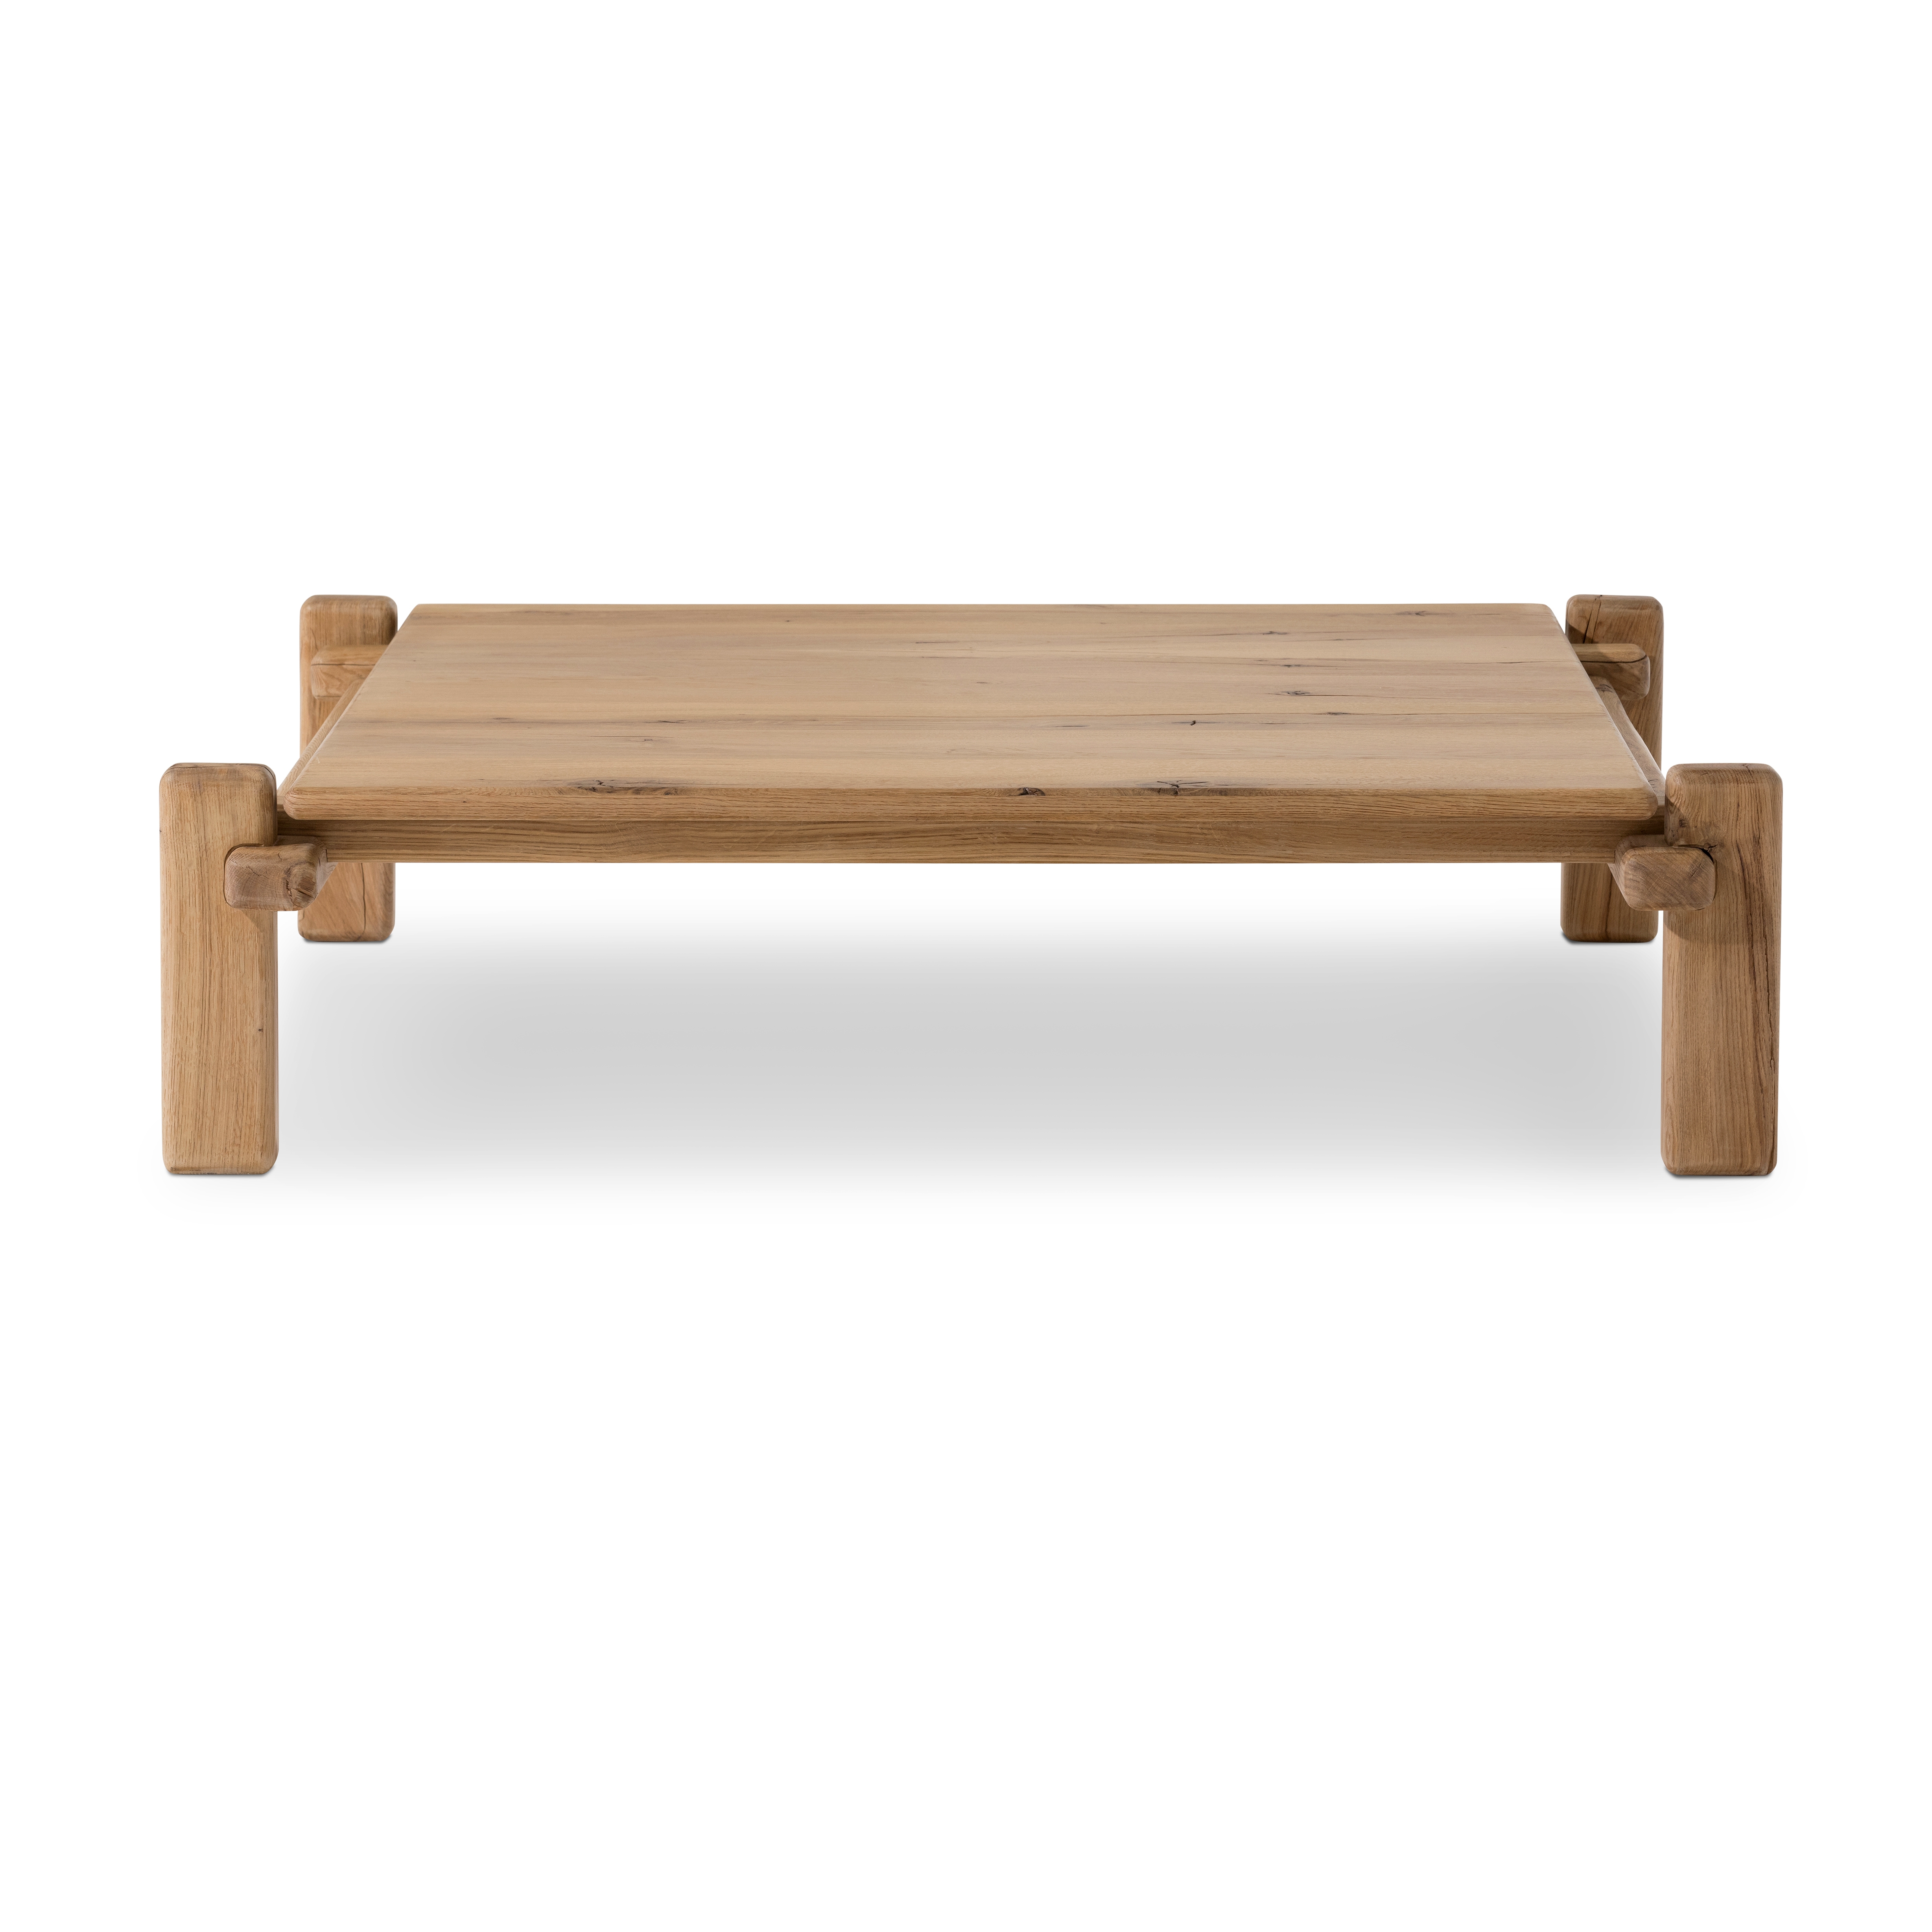 Marcia Square Coffee Table-French Oak - Image 3